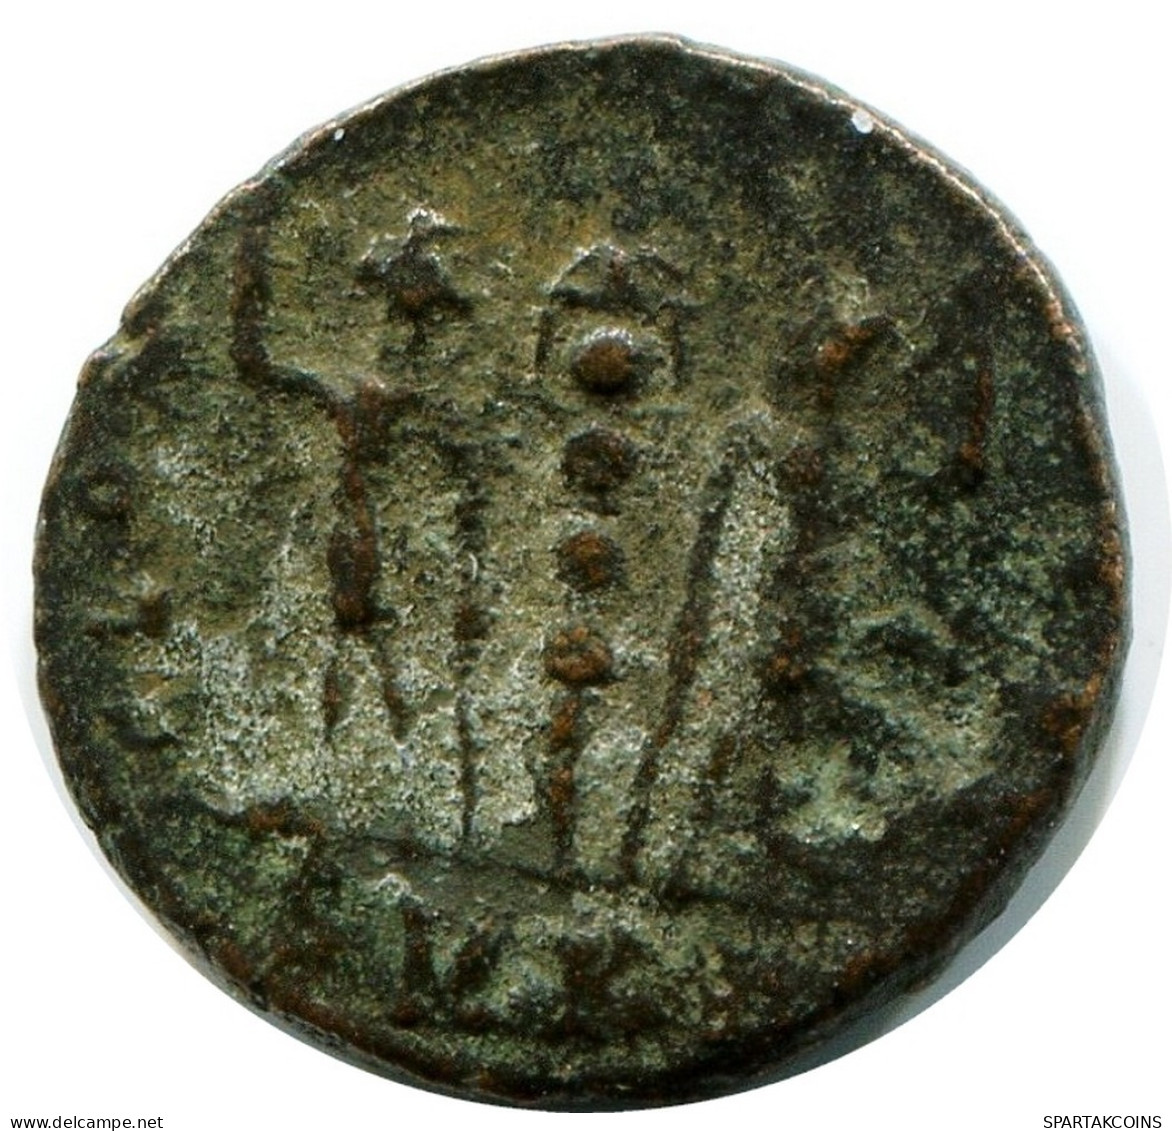 CONSTANS MINTED IN CYZICUS FOUND IN IHNASYAH HOARD EGYPT #ANC11584.14.F.A - The Christian Empire (307 AD To 363 AD)